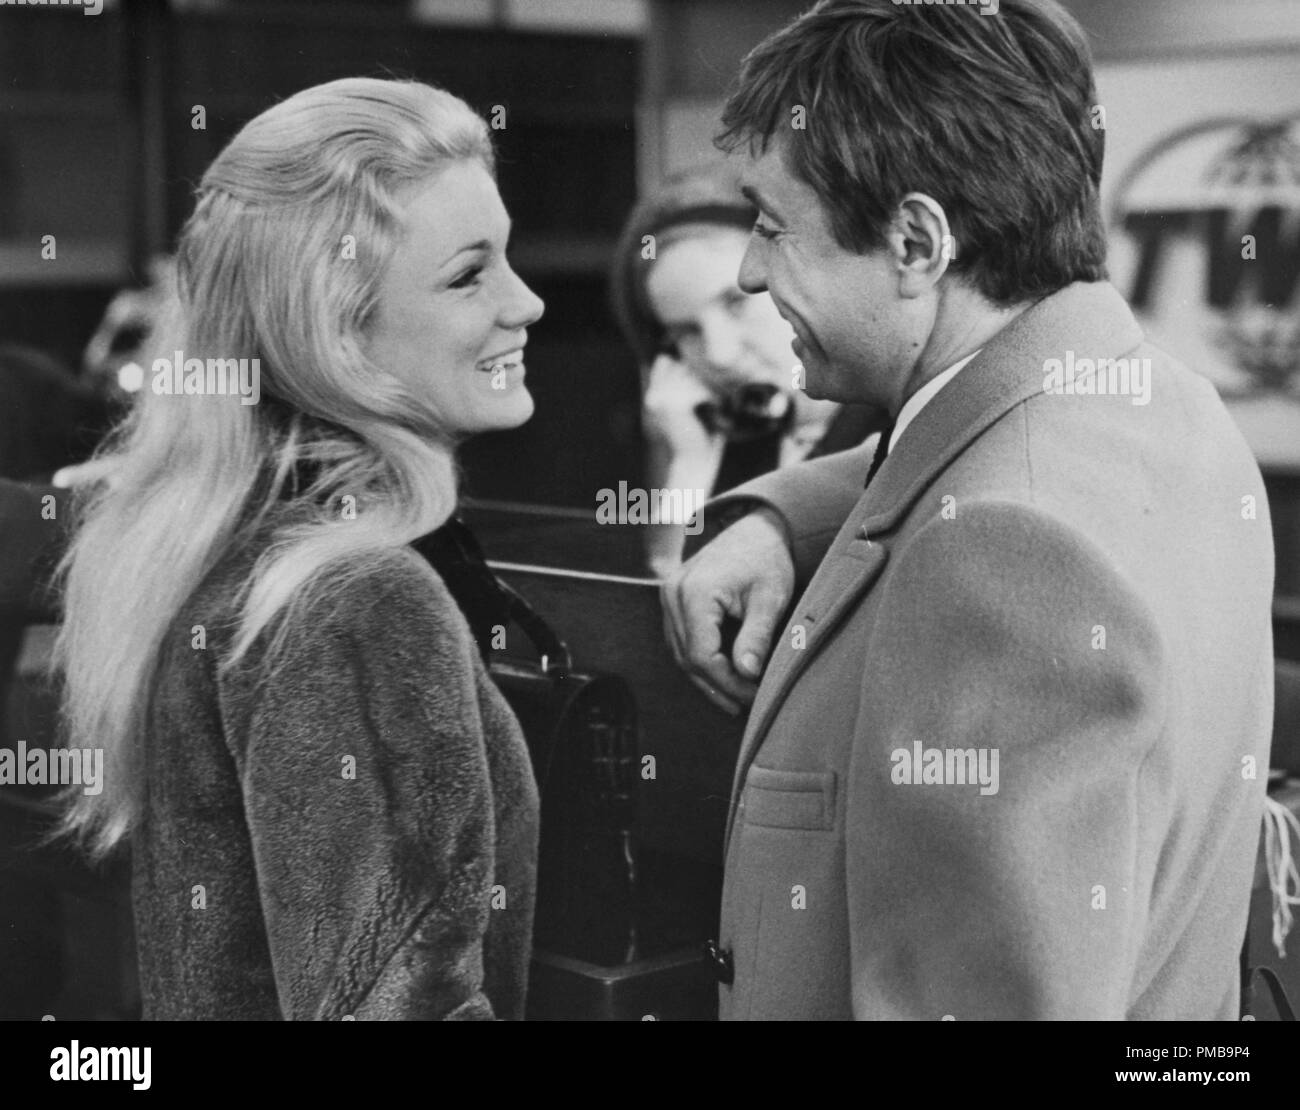 Yvette Mimieux with French film director Serge Bourguignon, 1966  File Reference # 32557 912THA Stock Photo